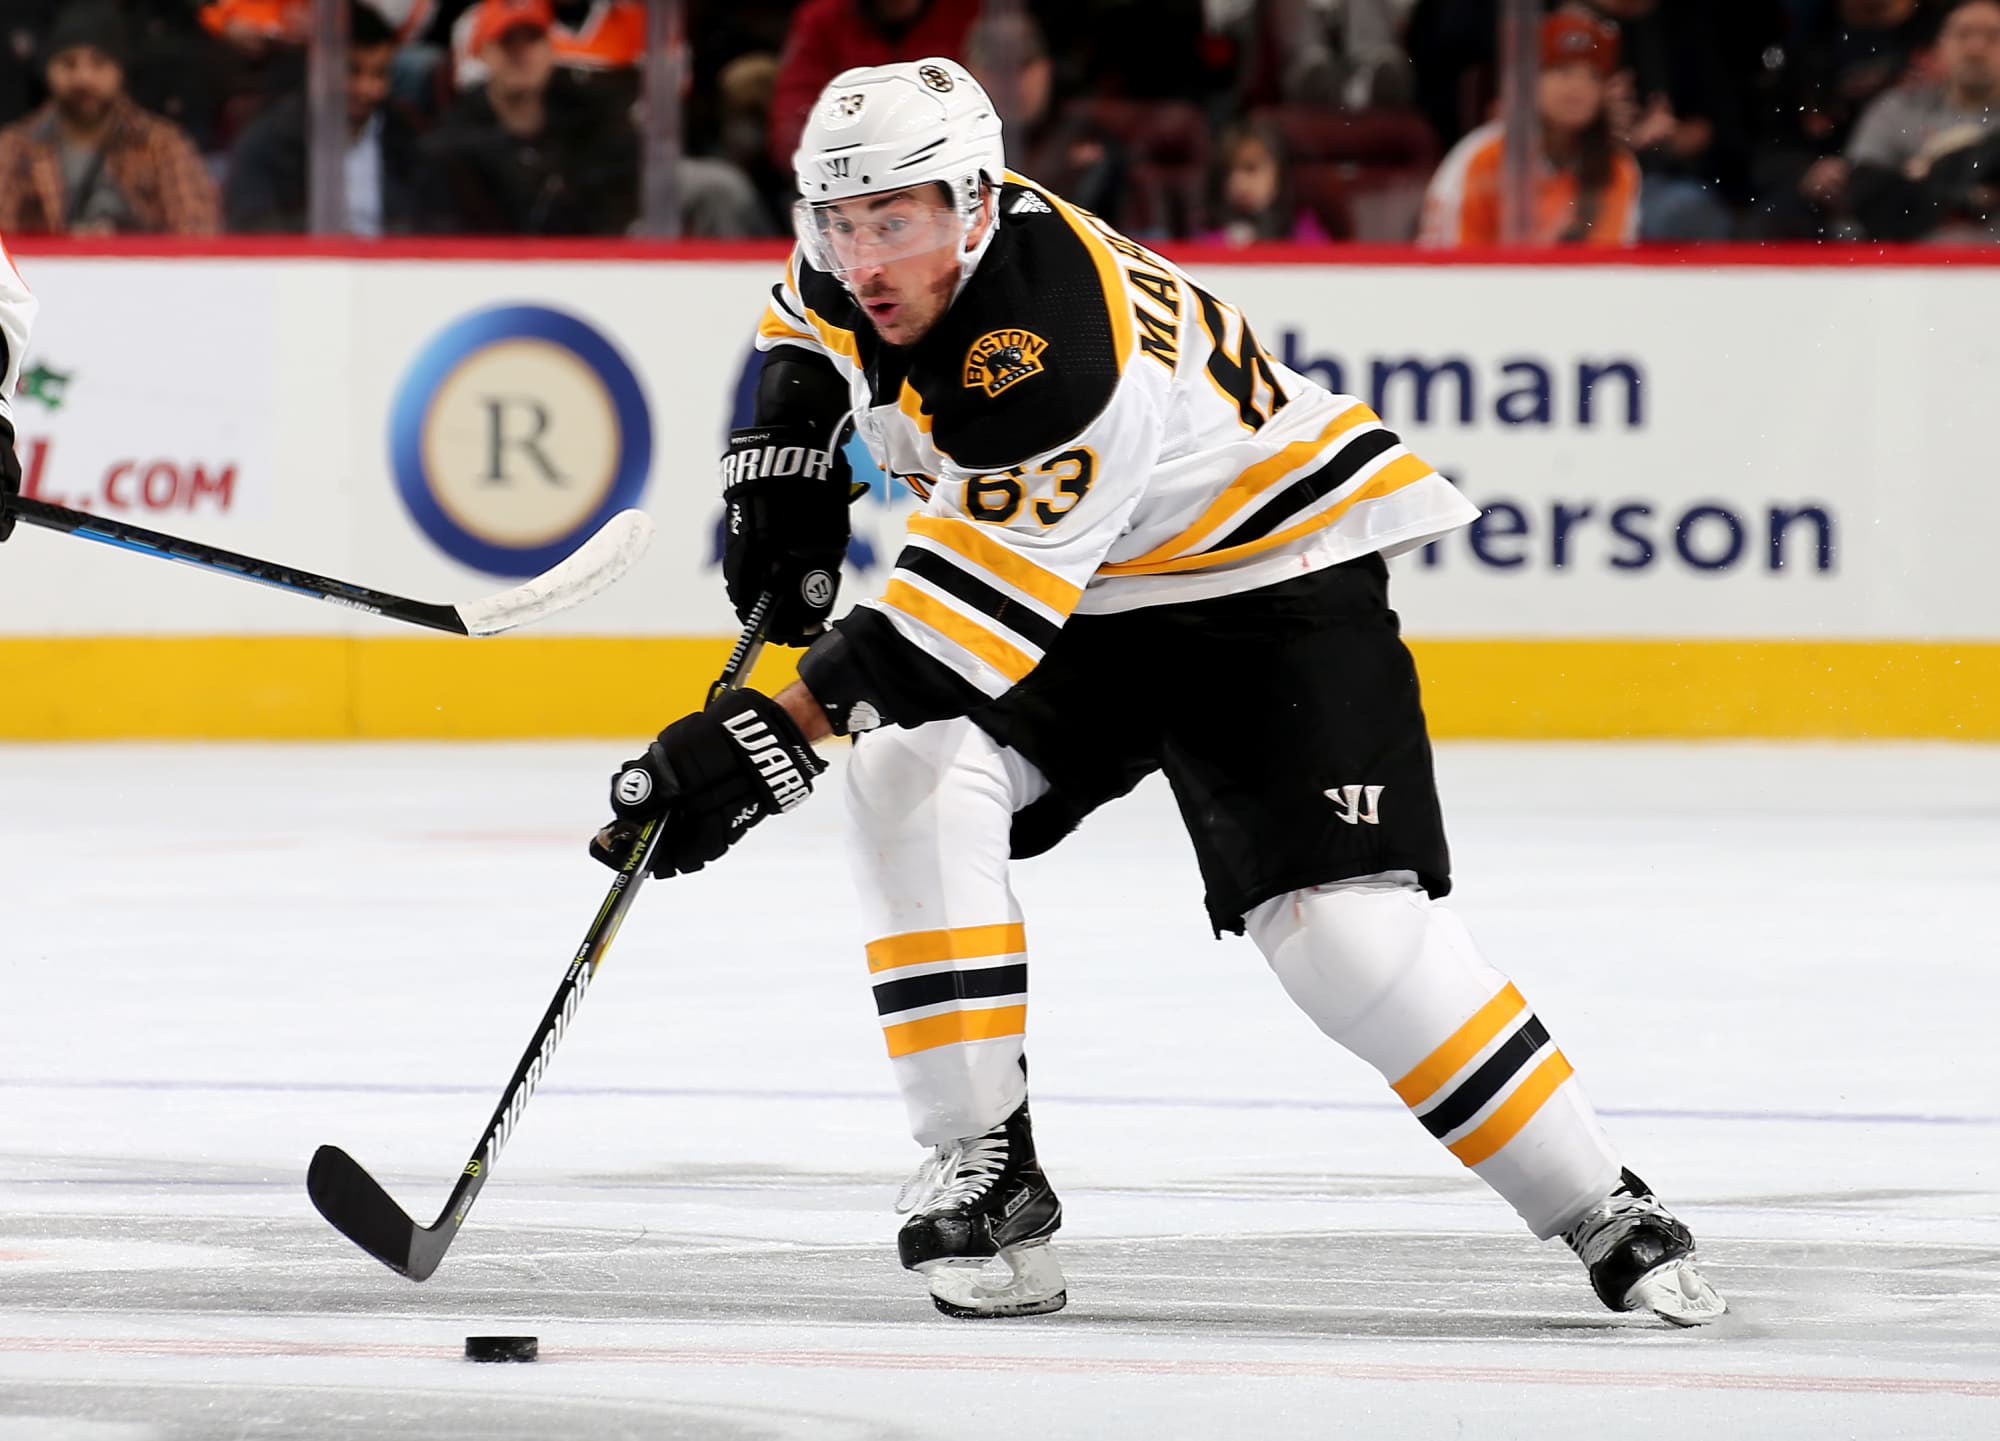 Boston Bruins: Brad Marchand sole Bruin to make NHL All-Star game